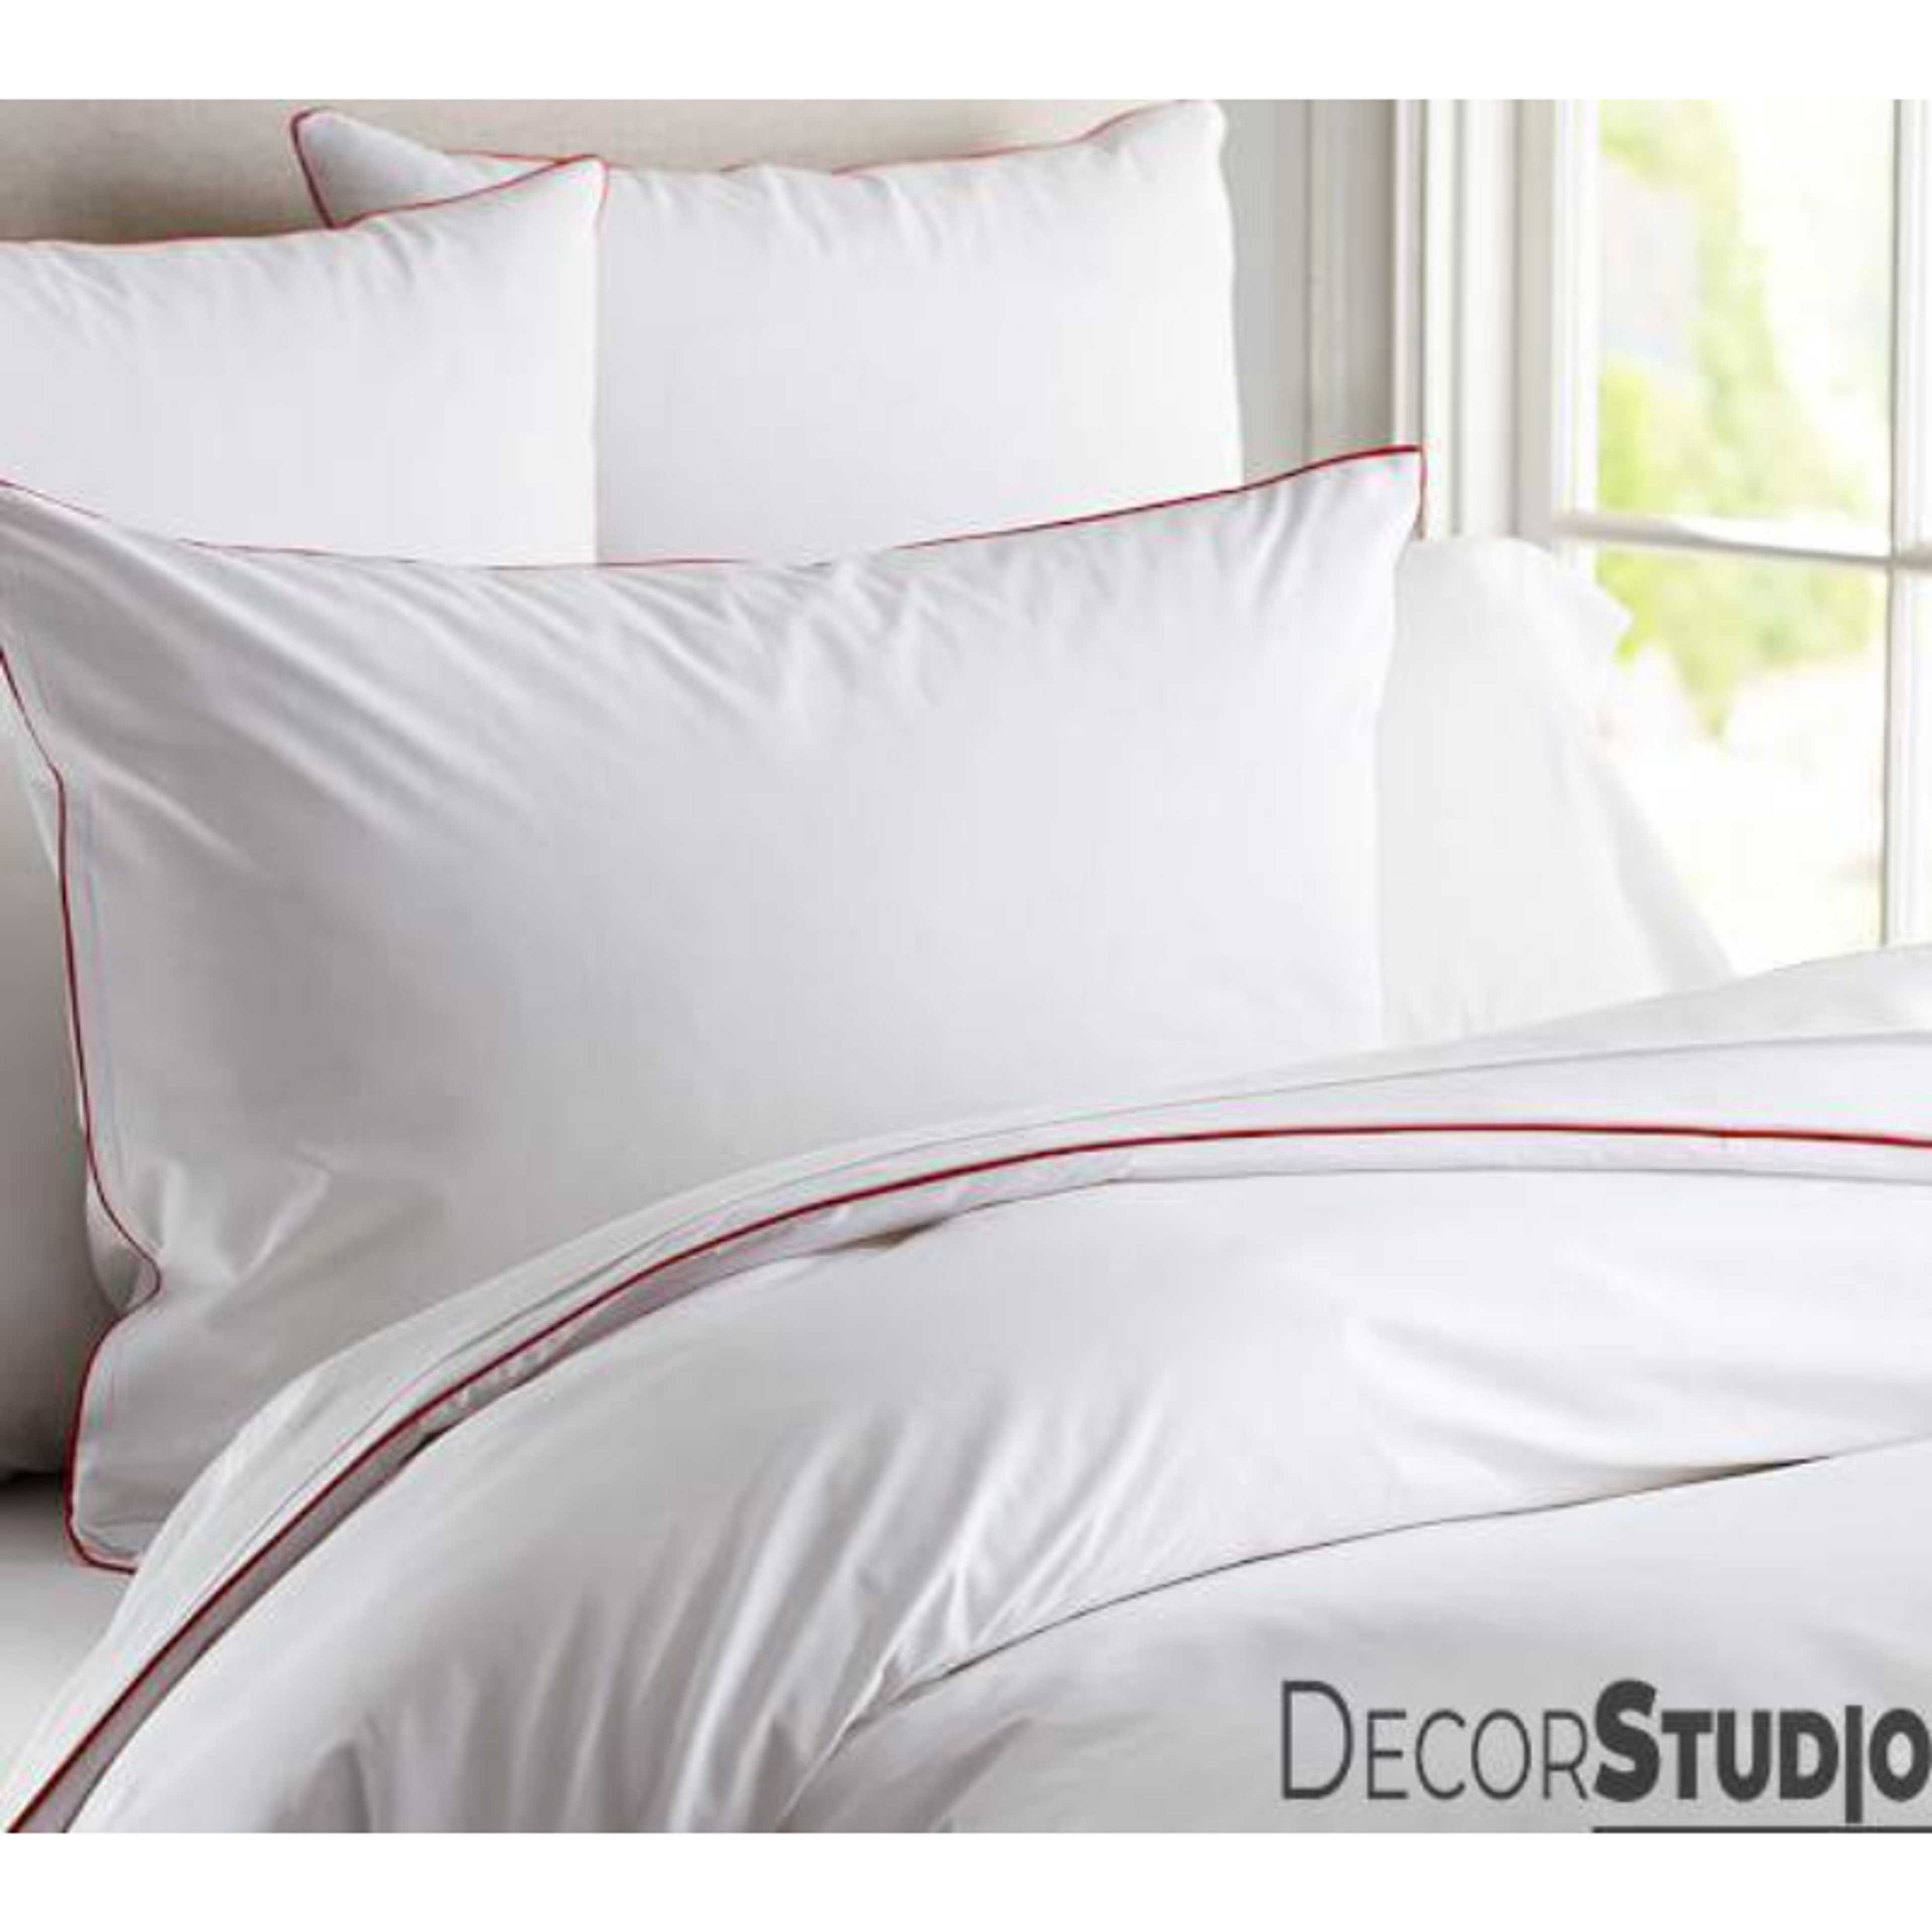 Stylish Red piping with White duvet set-6 pieces